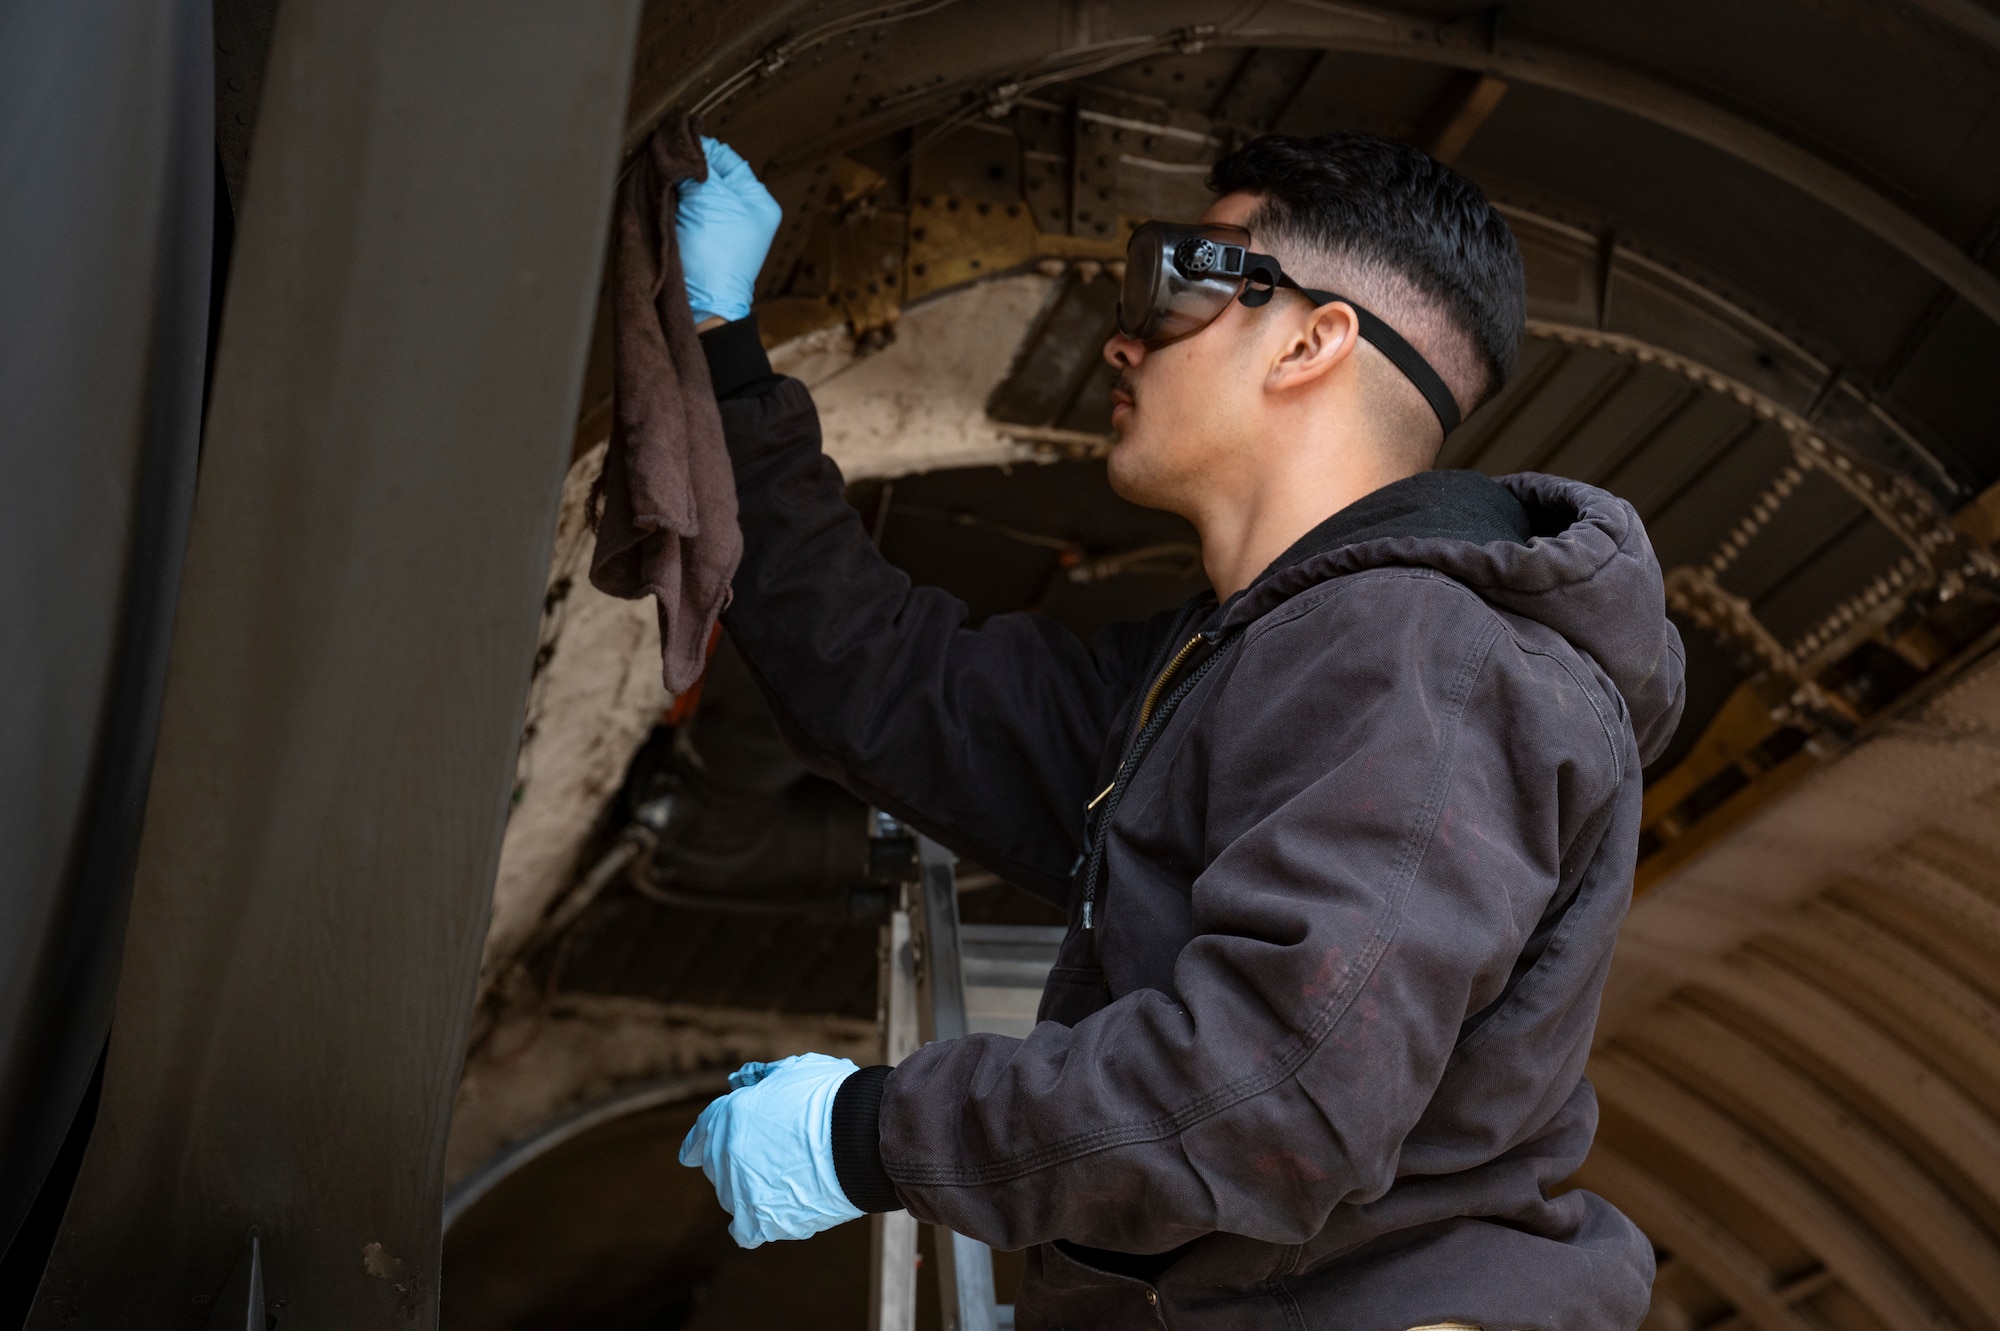 U.S. Air Force Senior Airman Brandon Vazquez-Flores, 9th Expeditionary Bomb Squadron electrical and environmental specialist, completes an engine swap on a B-1B Lancer at Morón Air Base, Spain, April 3, 2024, during Bomber Task Force Europe. BTF 24-2 demonstrates that NATO Allies and partner nations can seamlessly operate together to maintain a stable and prosperous Euro-Atlantic region. (U.S. Air Force photo by Airman 1st Class Emma Anderson)